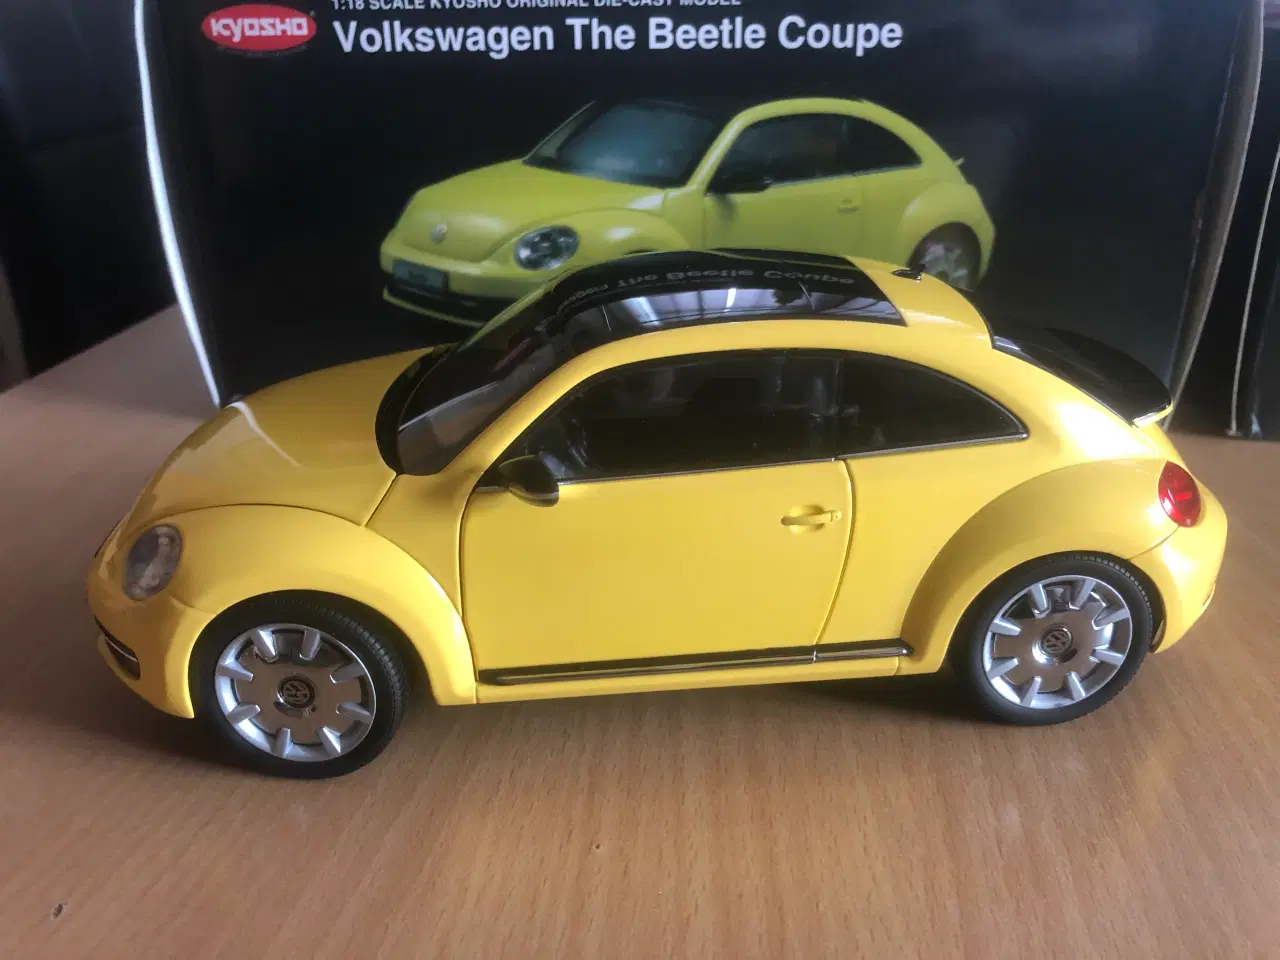 Billede 4 - 1:18 VW The Beetle Coupe